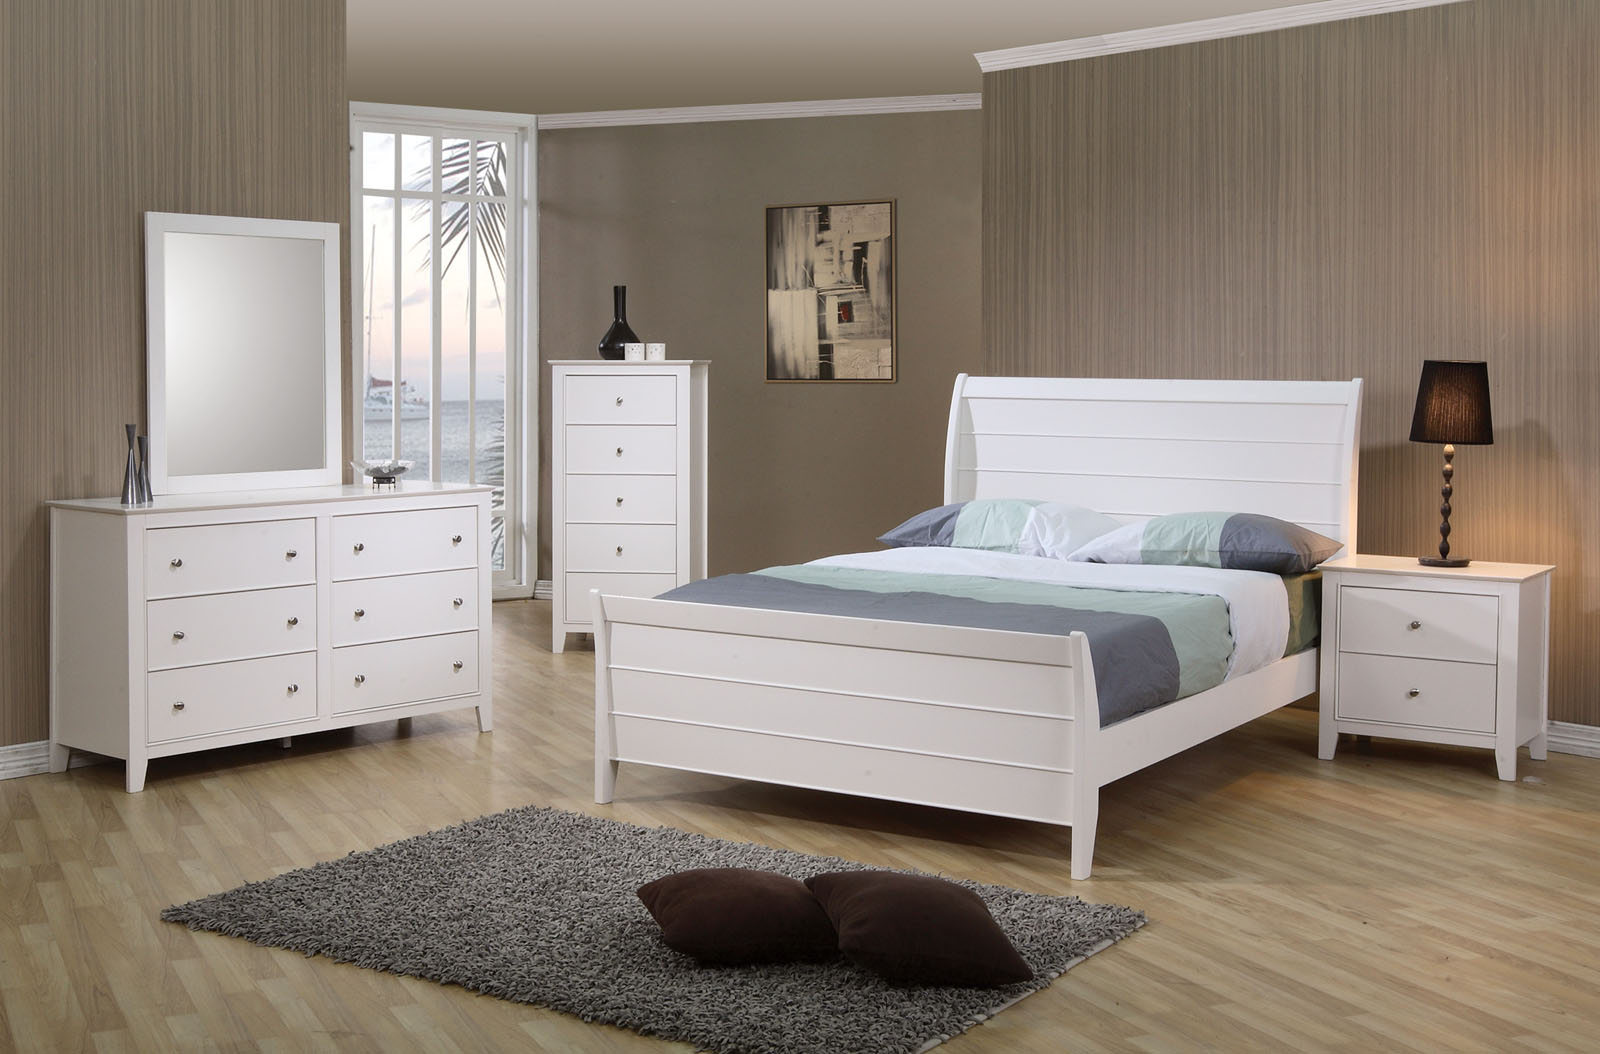 Coaster Selena Youth 4pc Sleigh Bedroom Set In White 400231 with regard to measurements 1600 X 1054